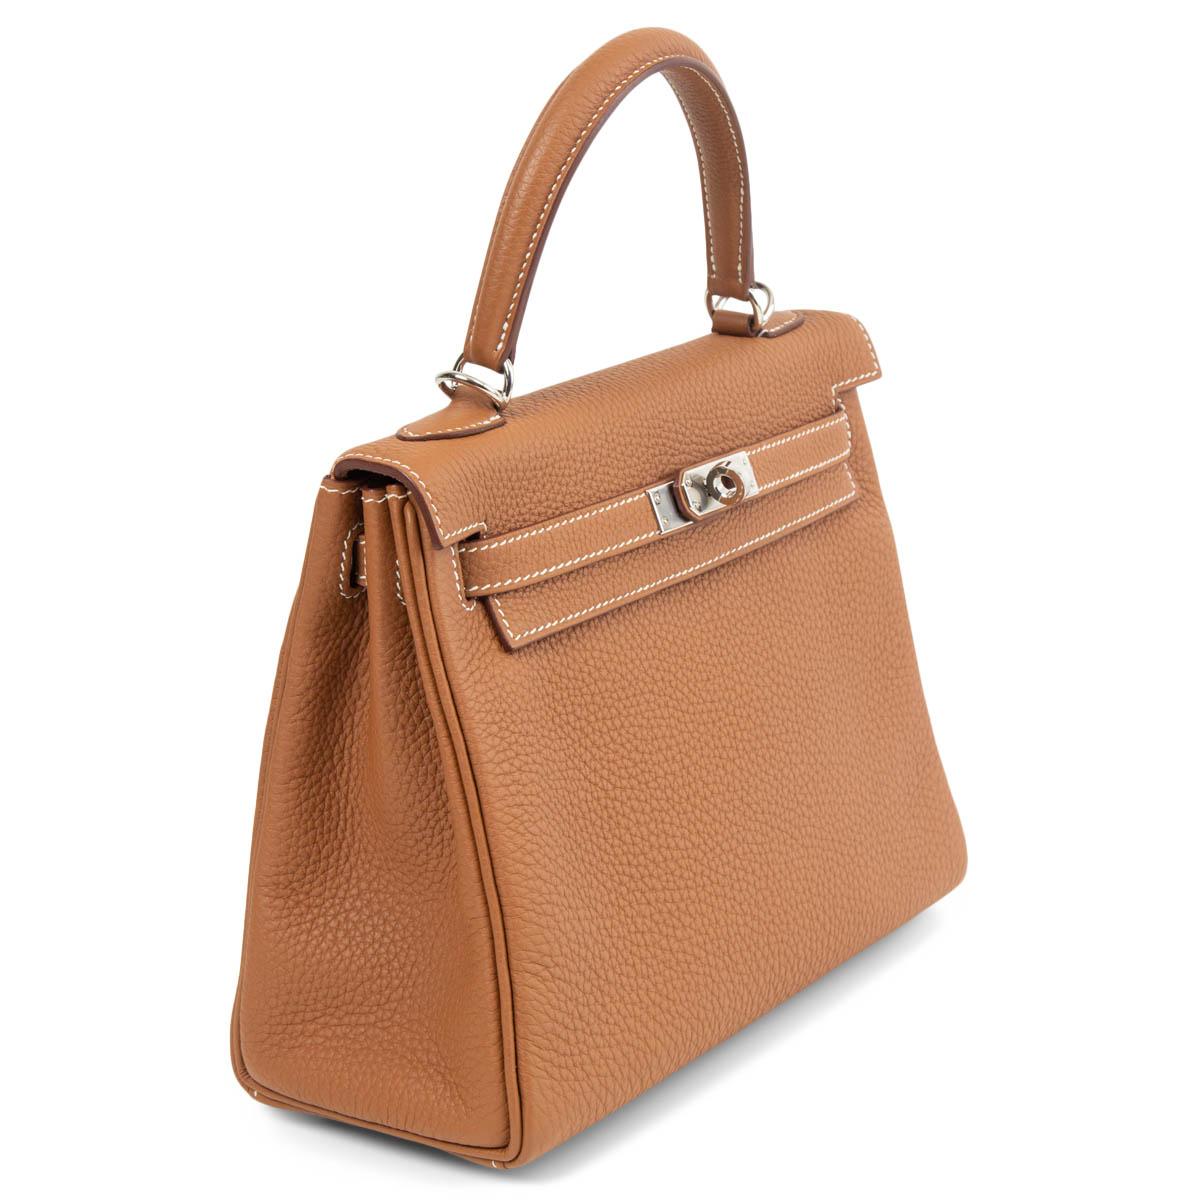 100% authentic Hermès Kelly 25 Retourne bag in Gold (camel brown) Veau Togo leather featuring palladium hardware. Lined in Chevre (goat skin) with an open pocket against the front and a zipper pocket against the back. Brand new. Full Set.